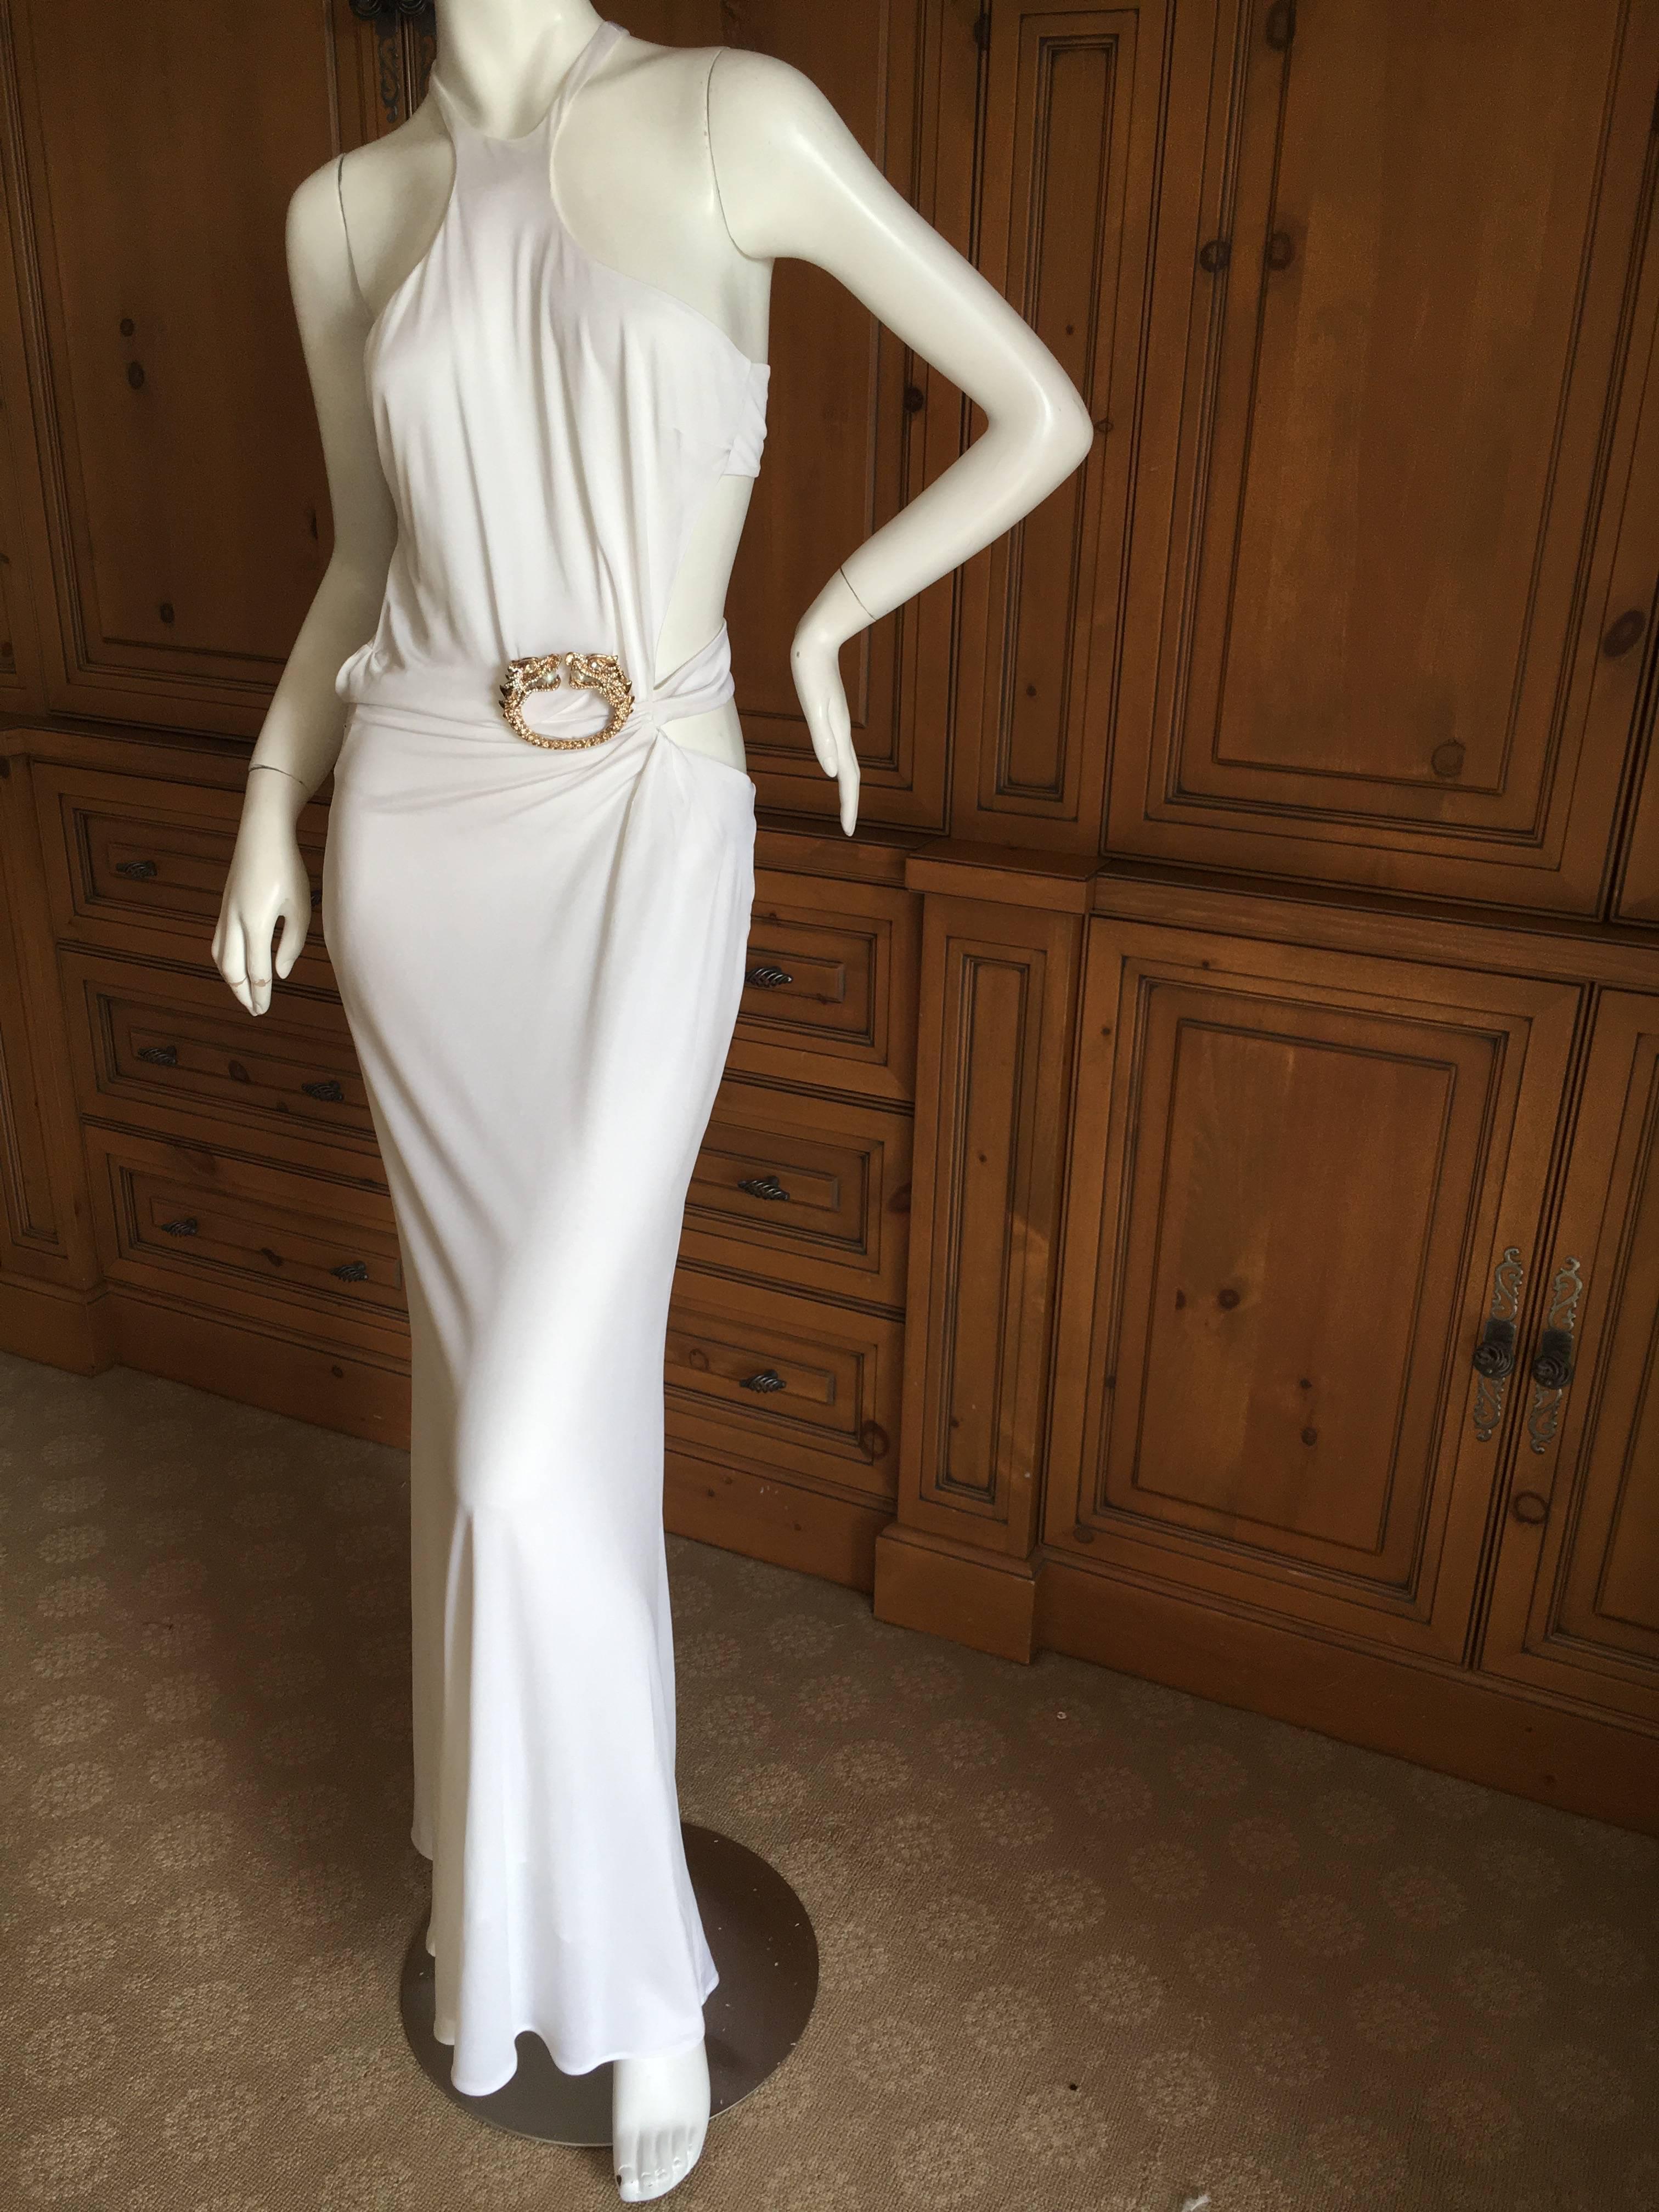 Iconic white halter evening dress with jeweled dragon from Gucci by Tom Ford 2004.
 As featured on Daria in the Gucci Ad.
 For the serious Tom Ford collector.
 French size 34-36, the size and fabric tag is no longer attached.
There is a lot of